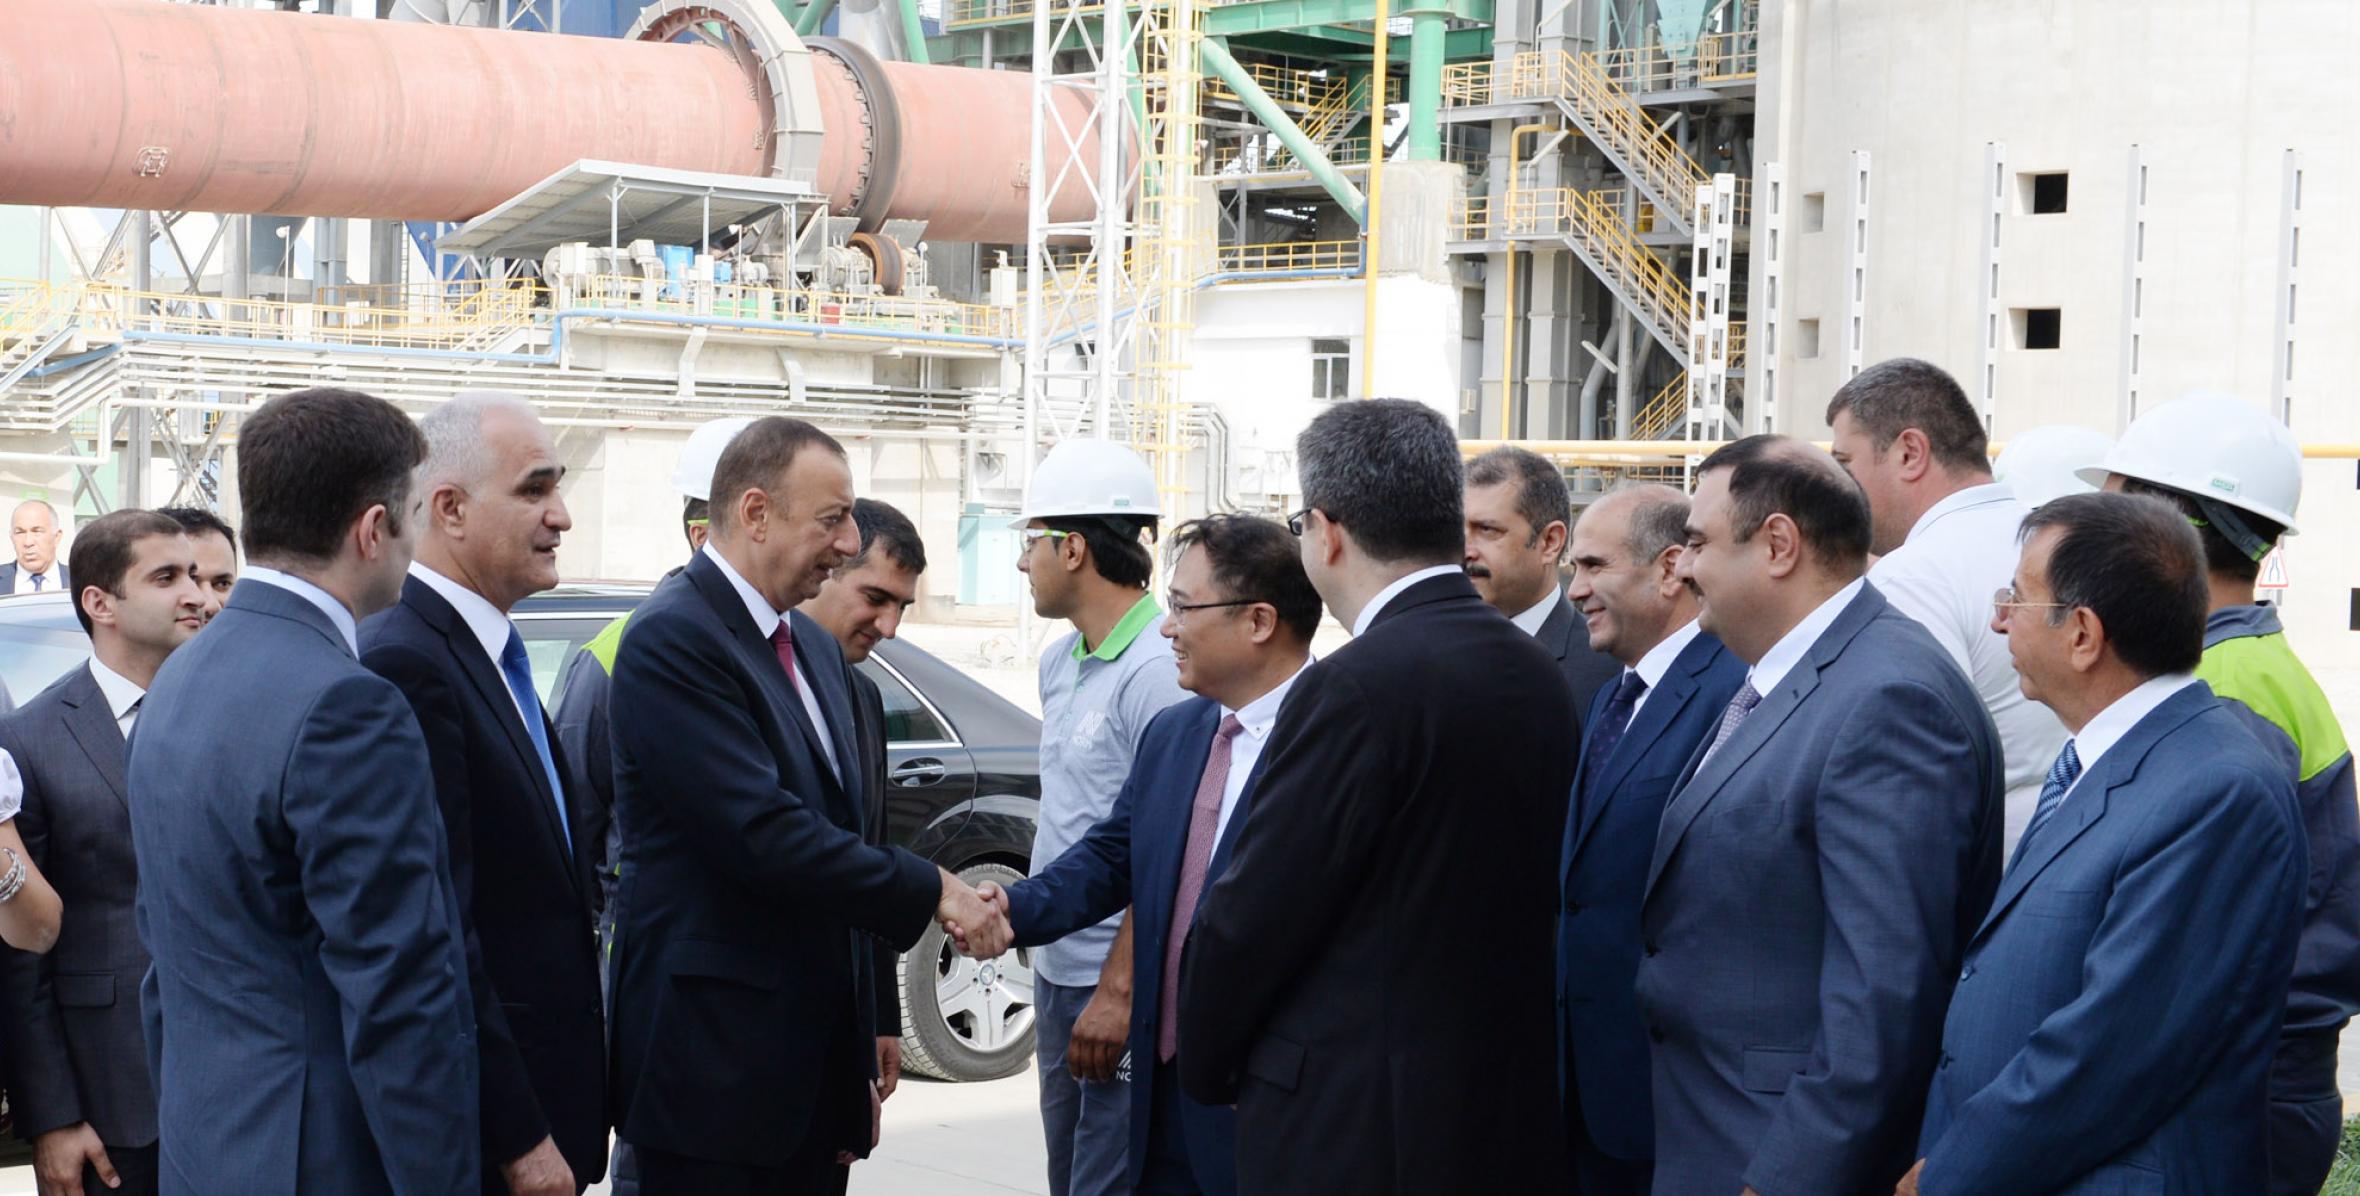 Ilham Aliyev attended the opening of Norm concrete plant